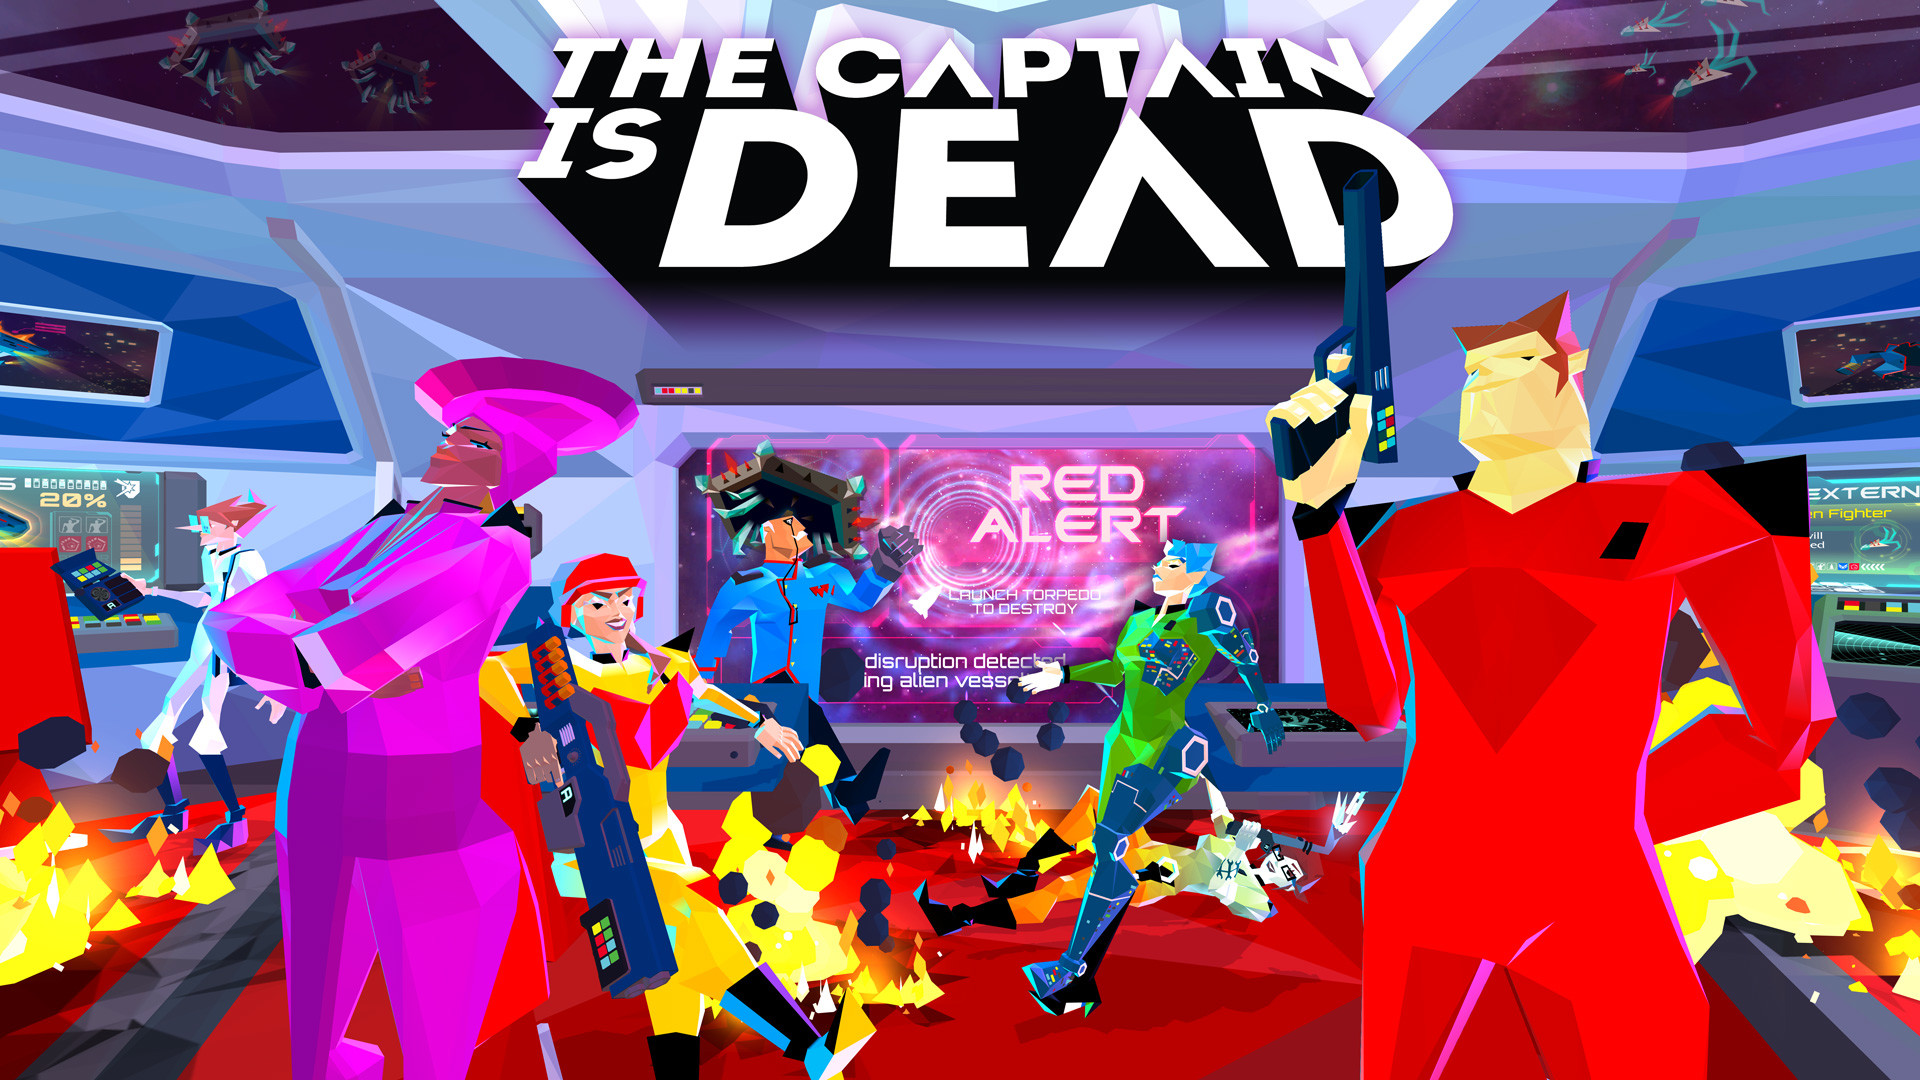 The Captain is Dead OST Featured Screenshot #1